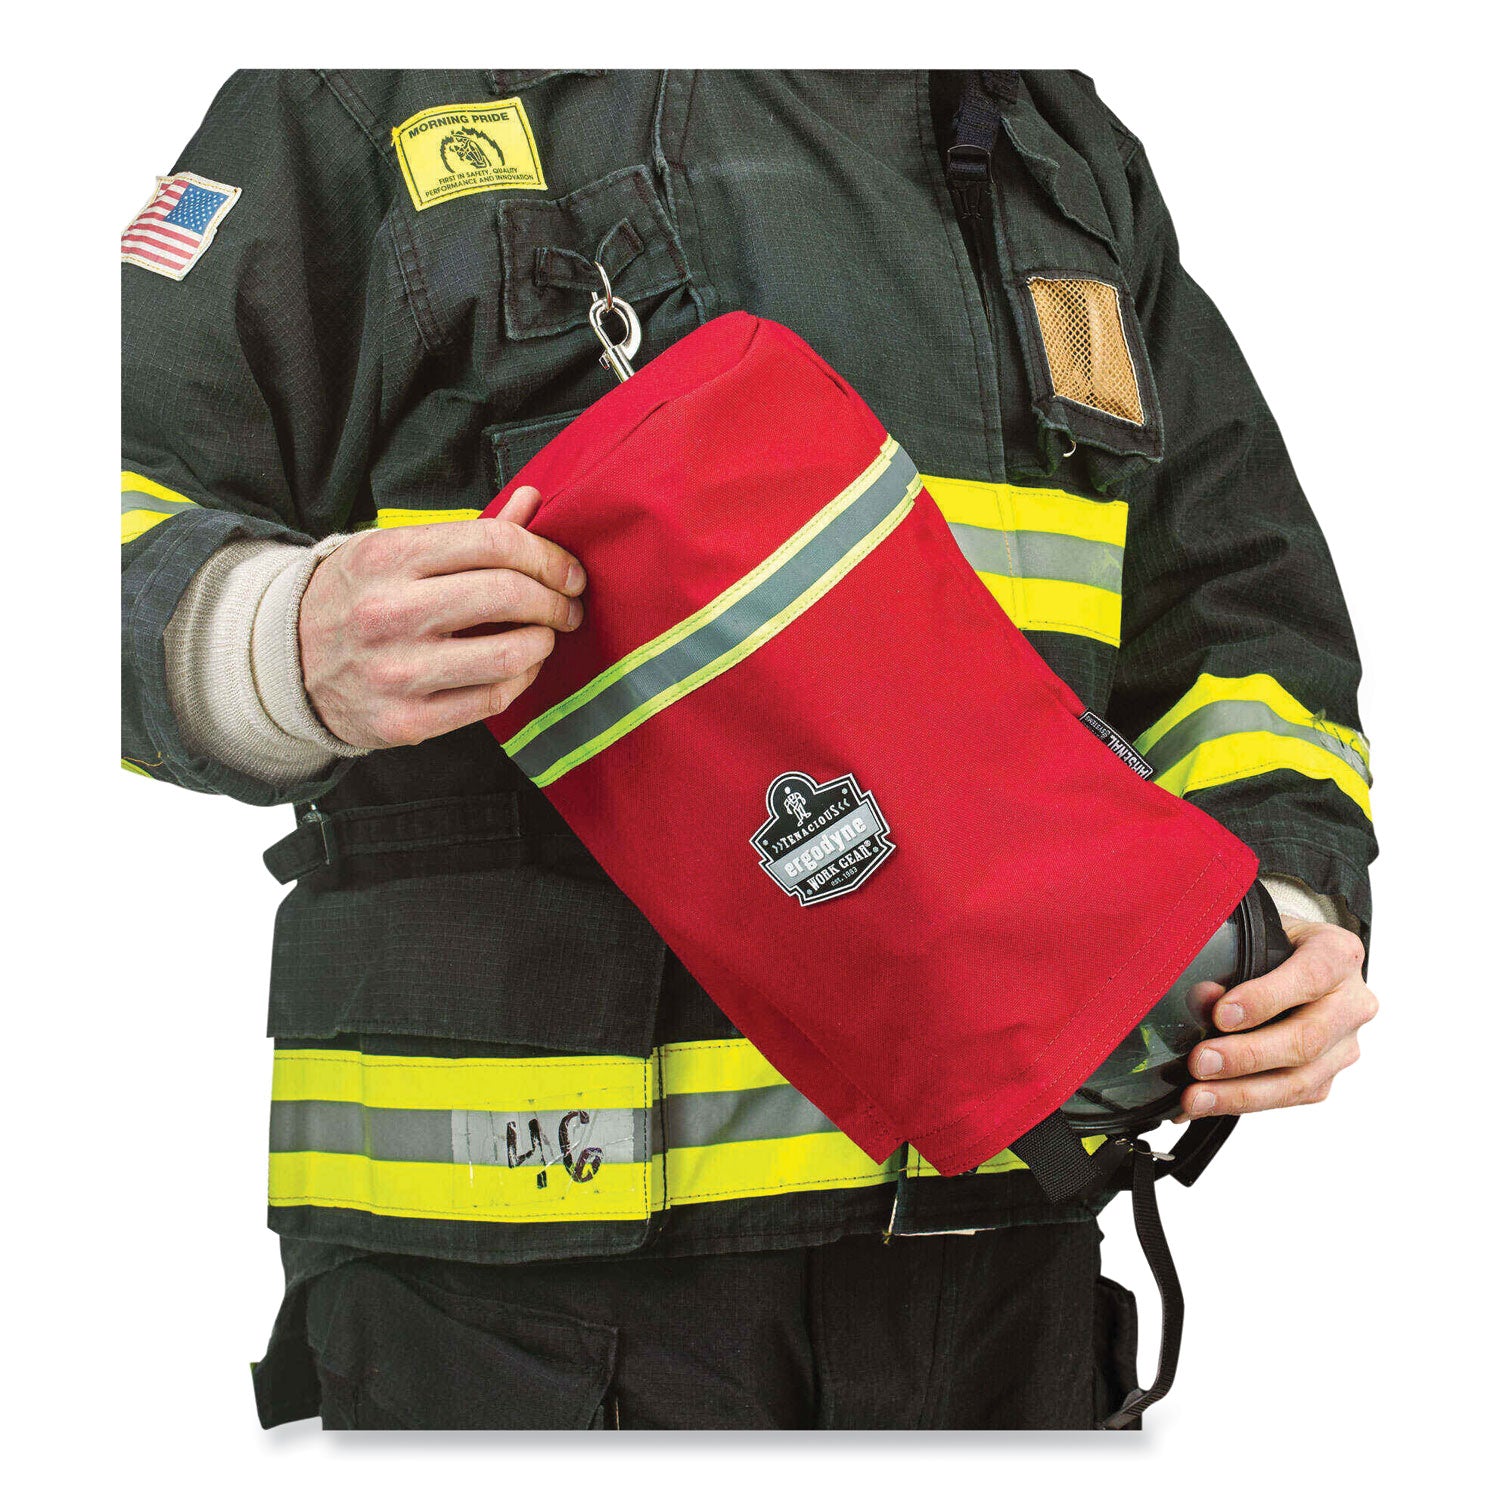 arsenal-5082-scba-mask-bag-with-hook-and-loop-closure-85-x-85-x-14-red-ships-in-1-3-business-days_ego13082 - 7